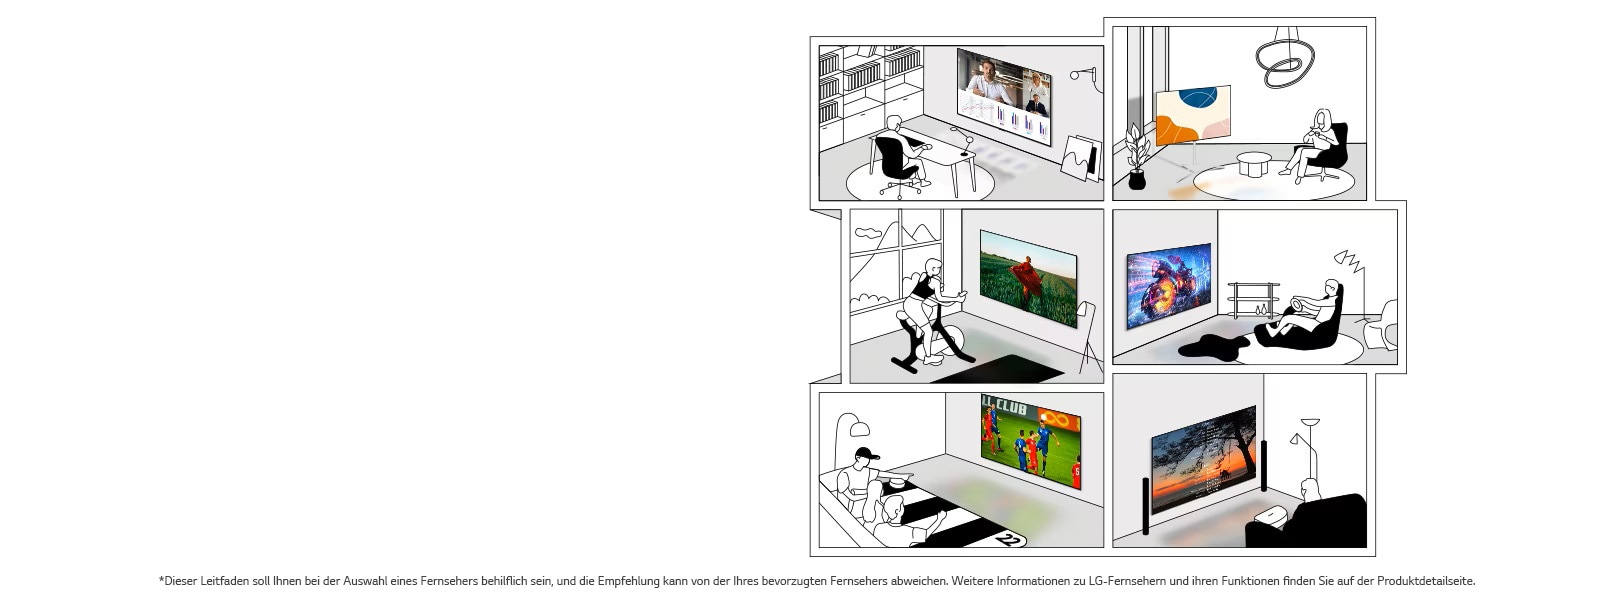 According to the interests of users related to TV usage, the lifestyles of users are shown through illustration image.